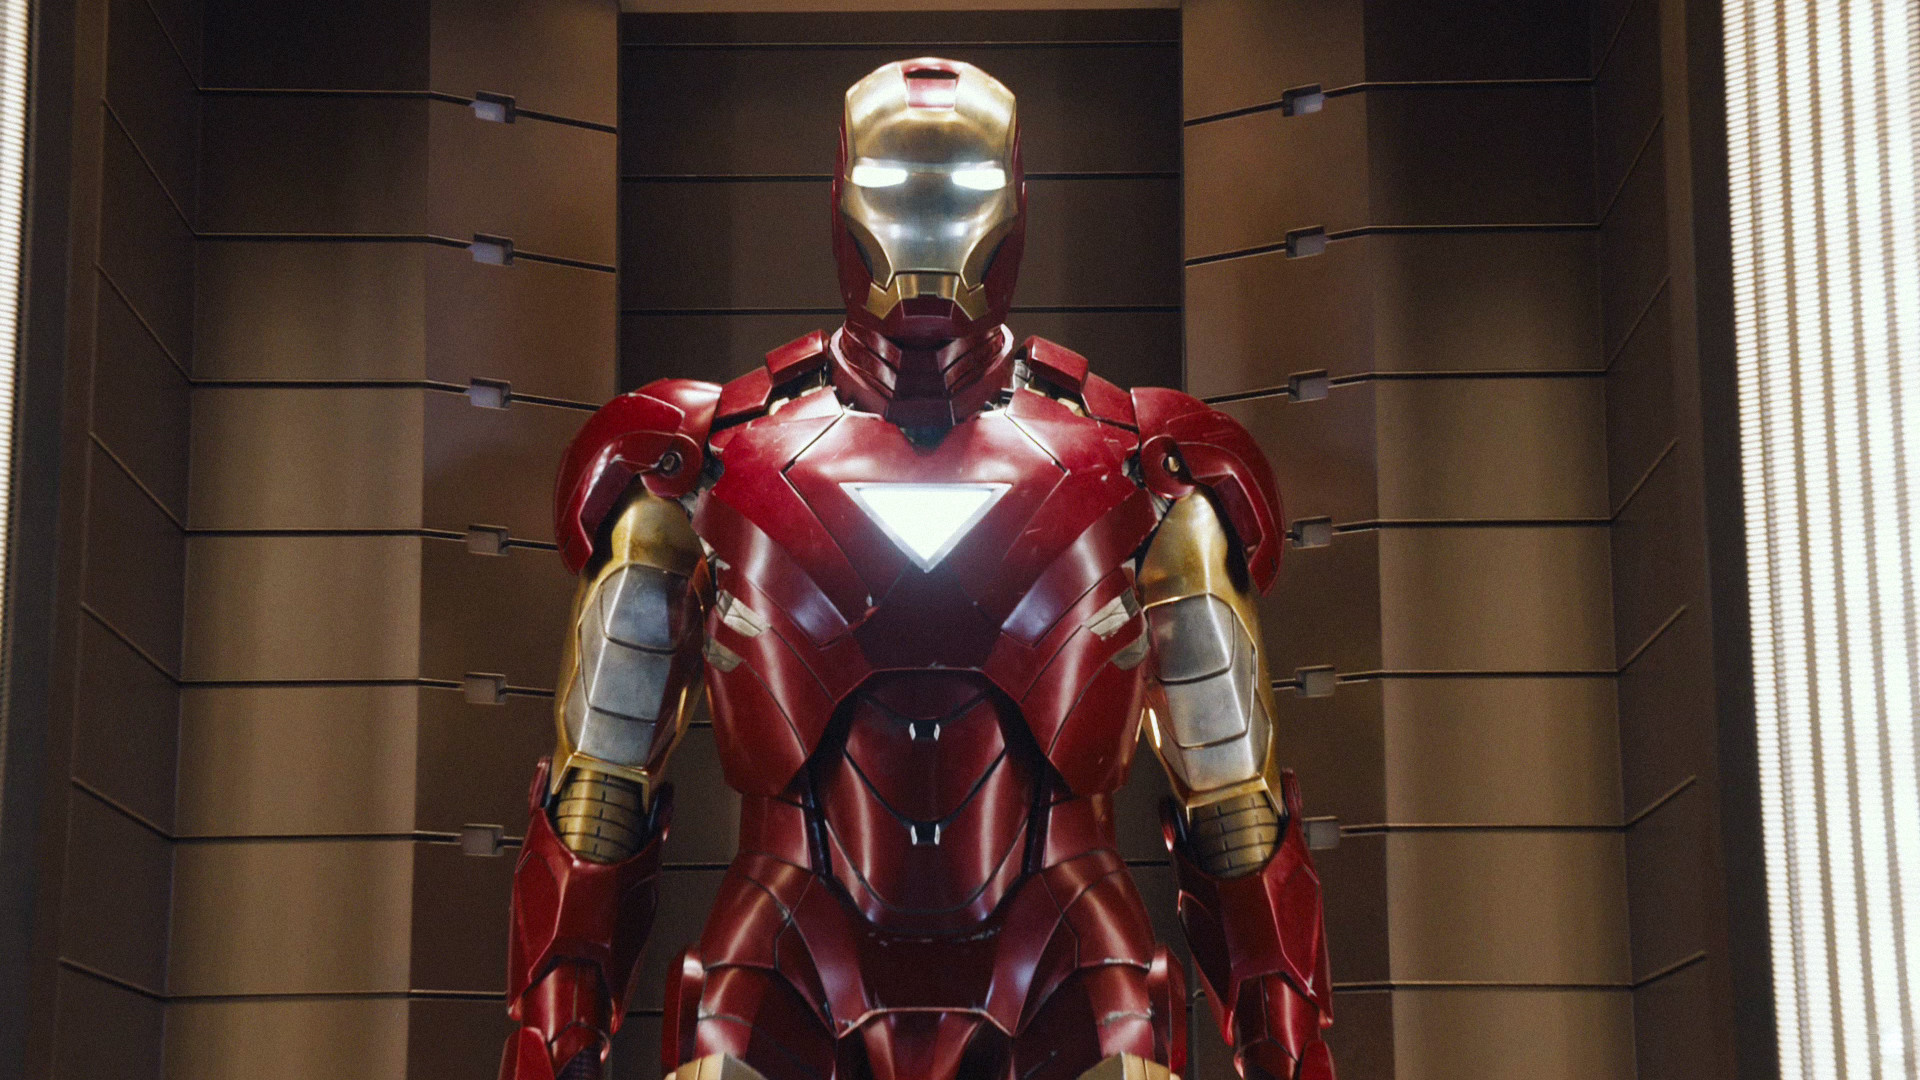 1920x1080 Iron Man in The Avengers Wallpaper